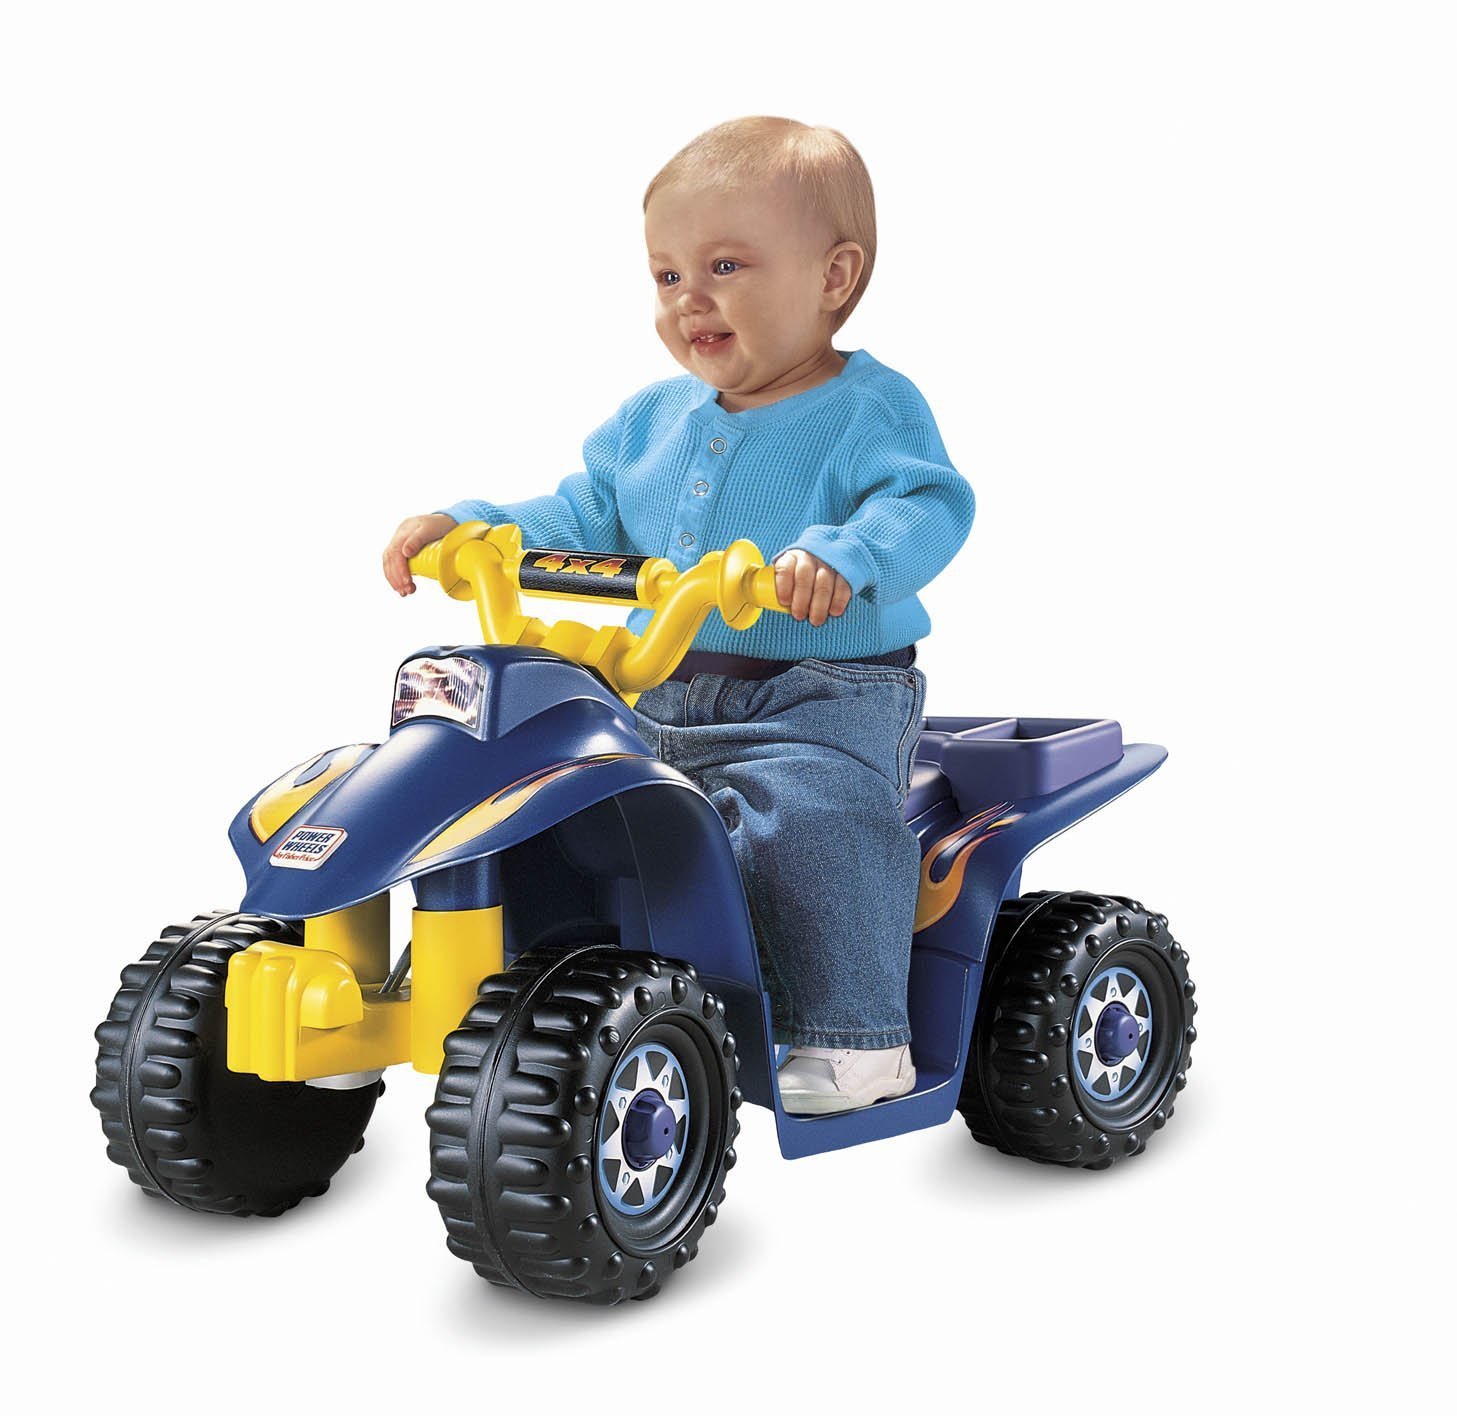 12 Best Ride On Toys for Toddlers (2020 